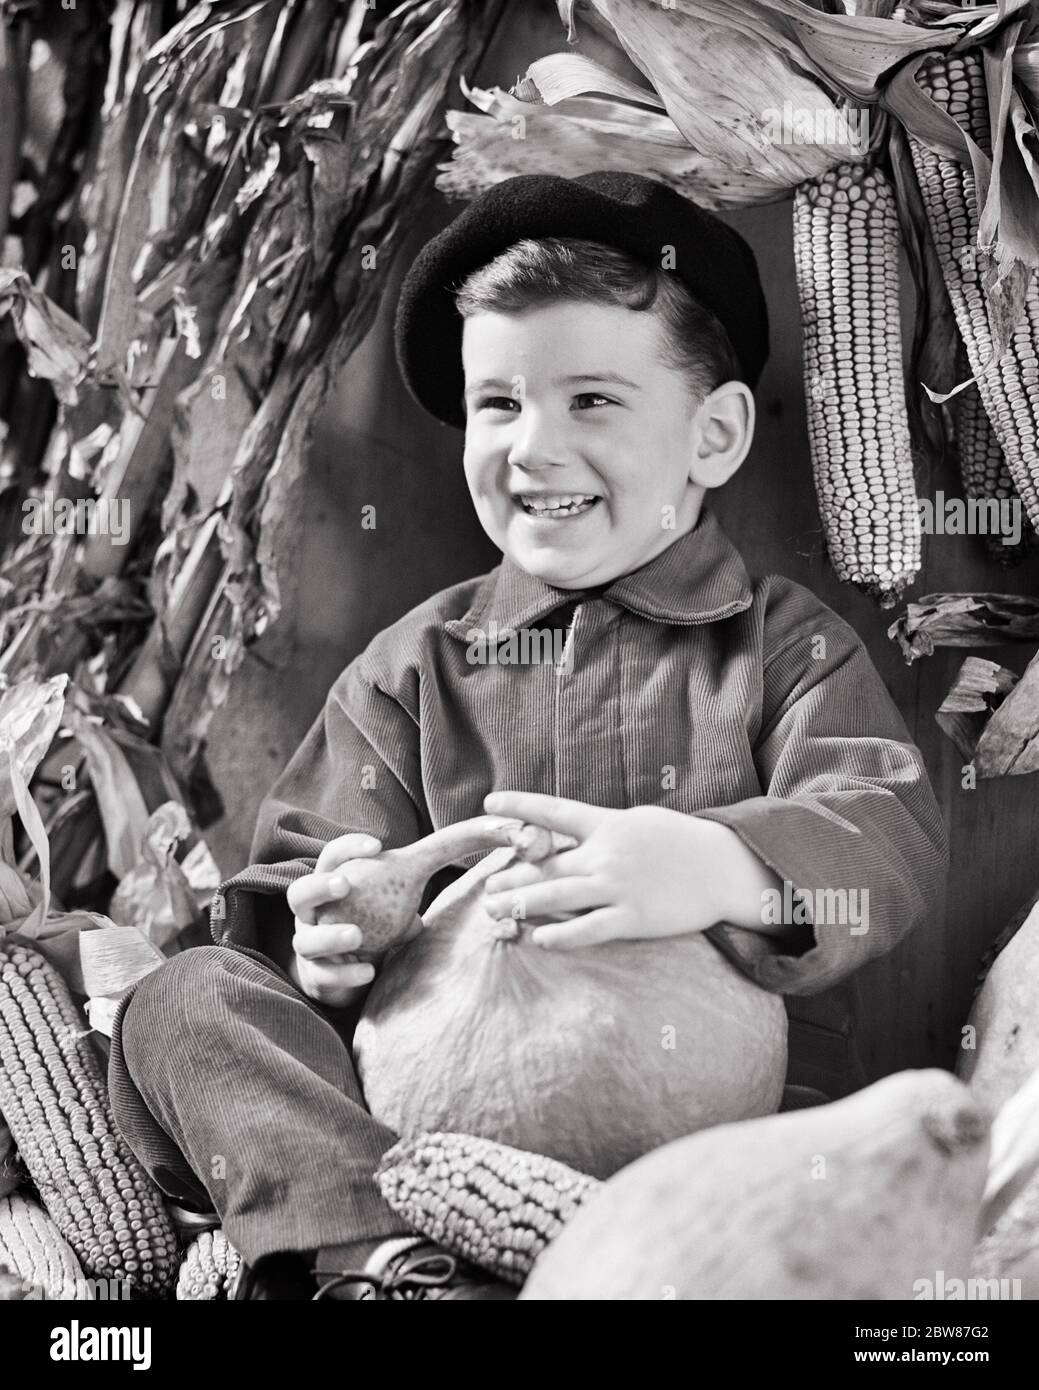 1940s 1950s SMALL BOY SMILING SITTING WITH AUTUMN PUMPKIN GOURDS EARS OF DRIED CORN WEARING CORDUROY JACKET AND TROUSERS - c1743 HAR001 HARS CONFIDENCE AGRICULTURE B&W BRUNETTE HAPPINESS CHEERFUL TROUSERS DRIED AND CORDUROY FALL SEASON PRIDE SMILES JOYFUL GOURDS JUVENILES AUTUMNAL BLACK AND WHITE CAUCASIAN ETHNICITY FALL FOLIAGE HAR001 OLD FASHIONED Stock Photo